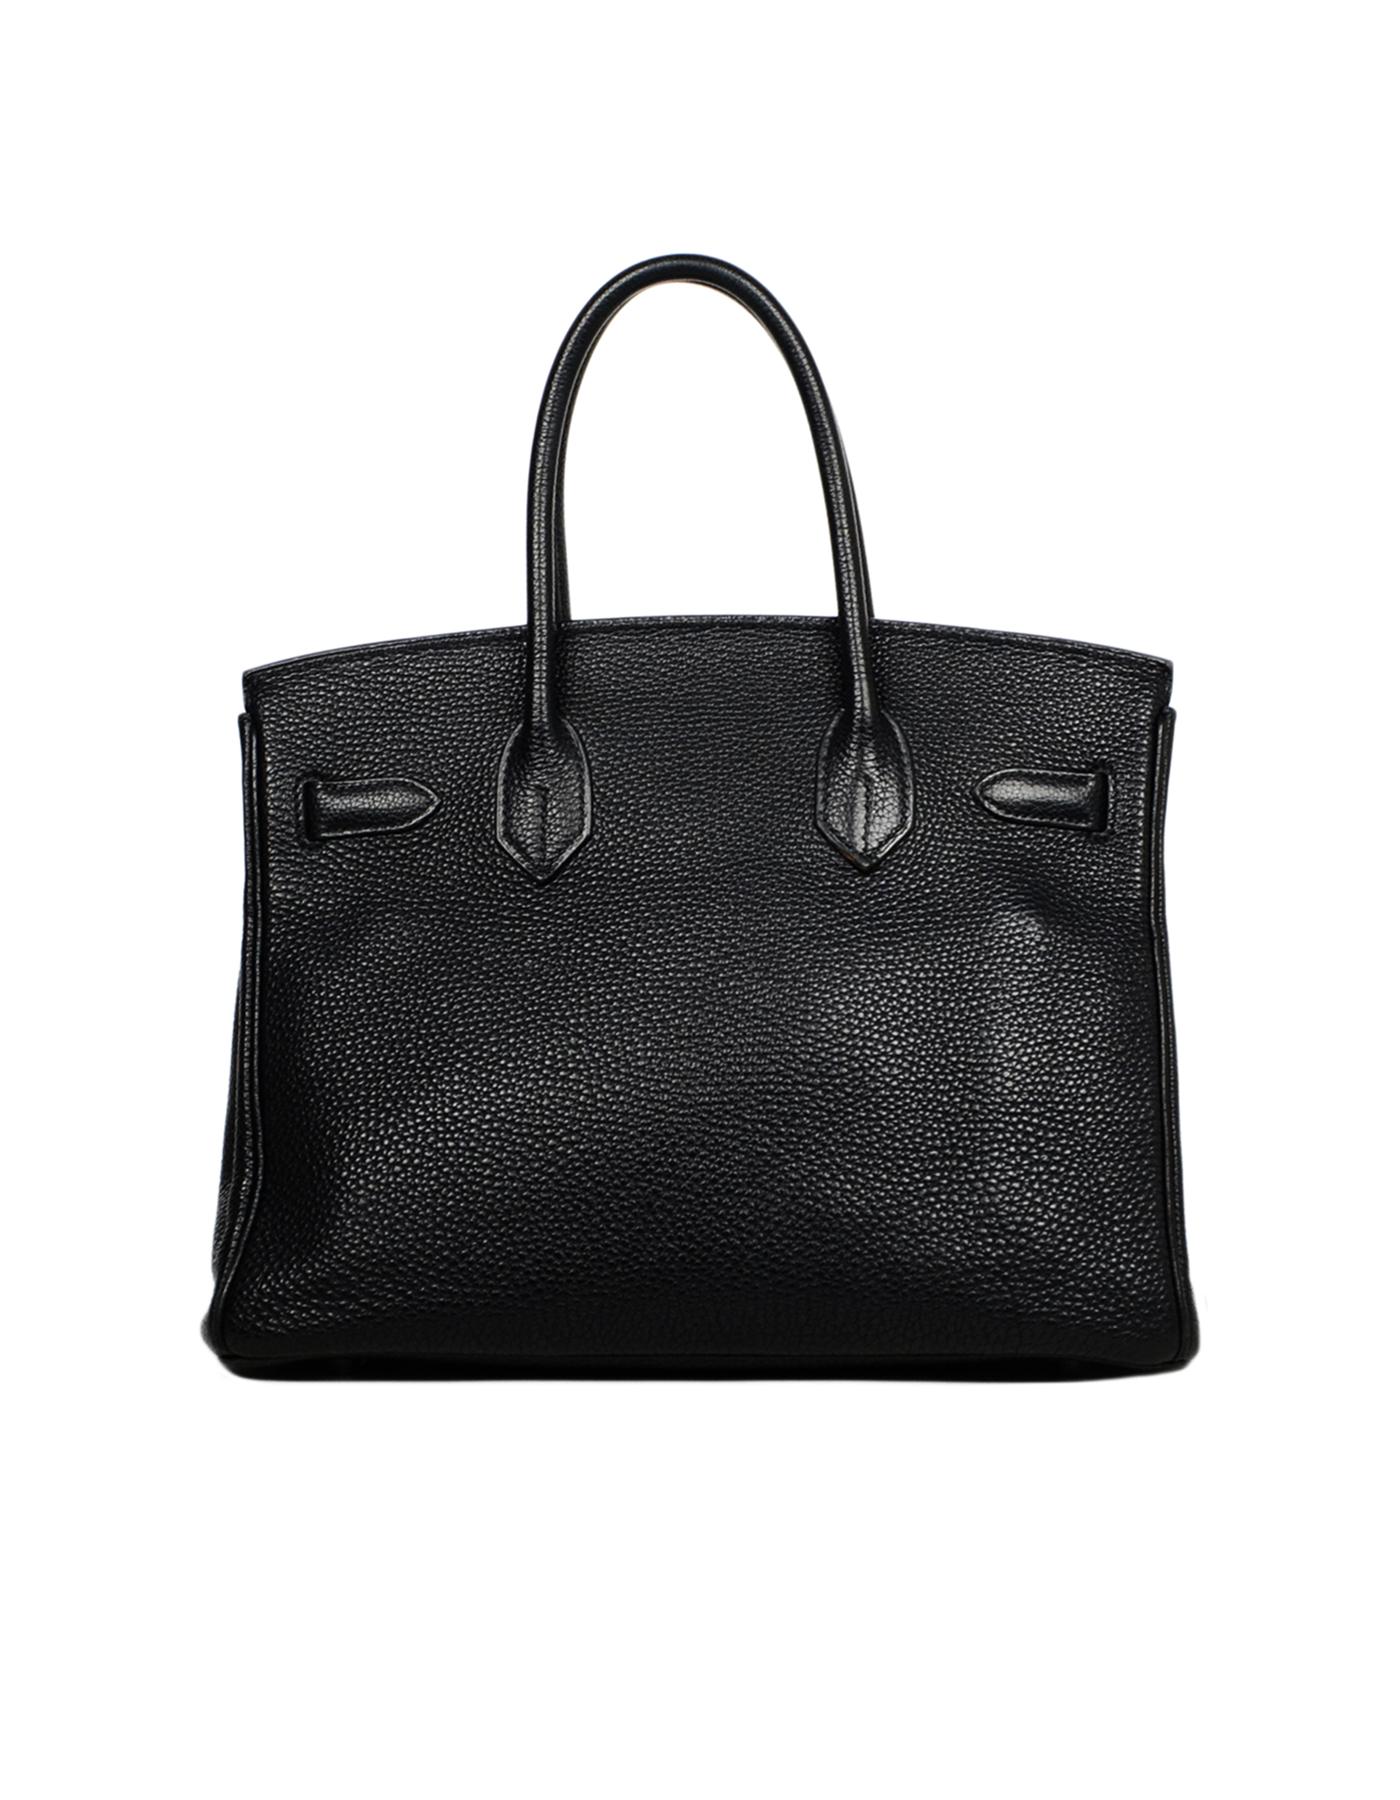 Hermes Black Togo Leather 30cm Birkin Bag W/ PHW In Excellent Condition In New York, NY